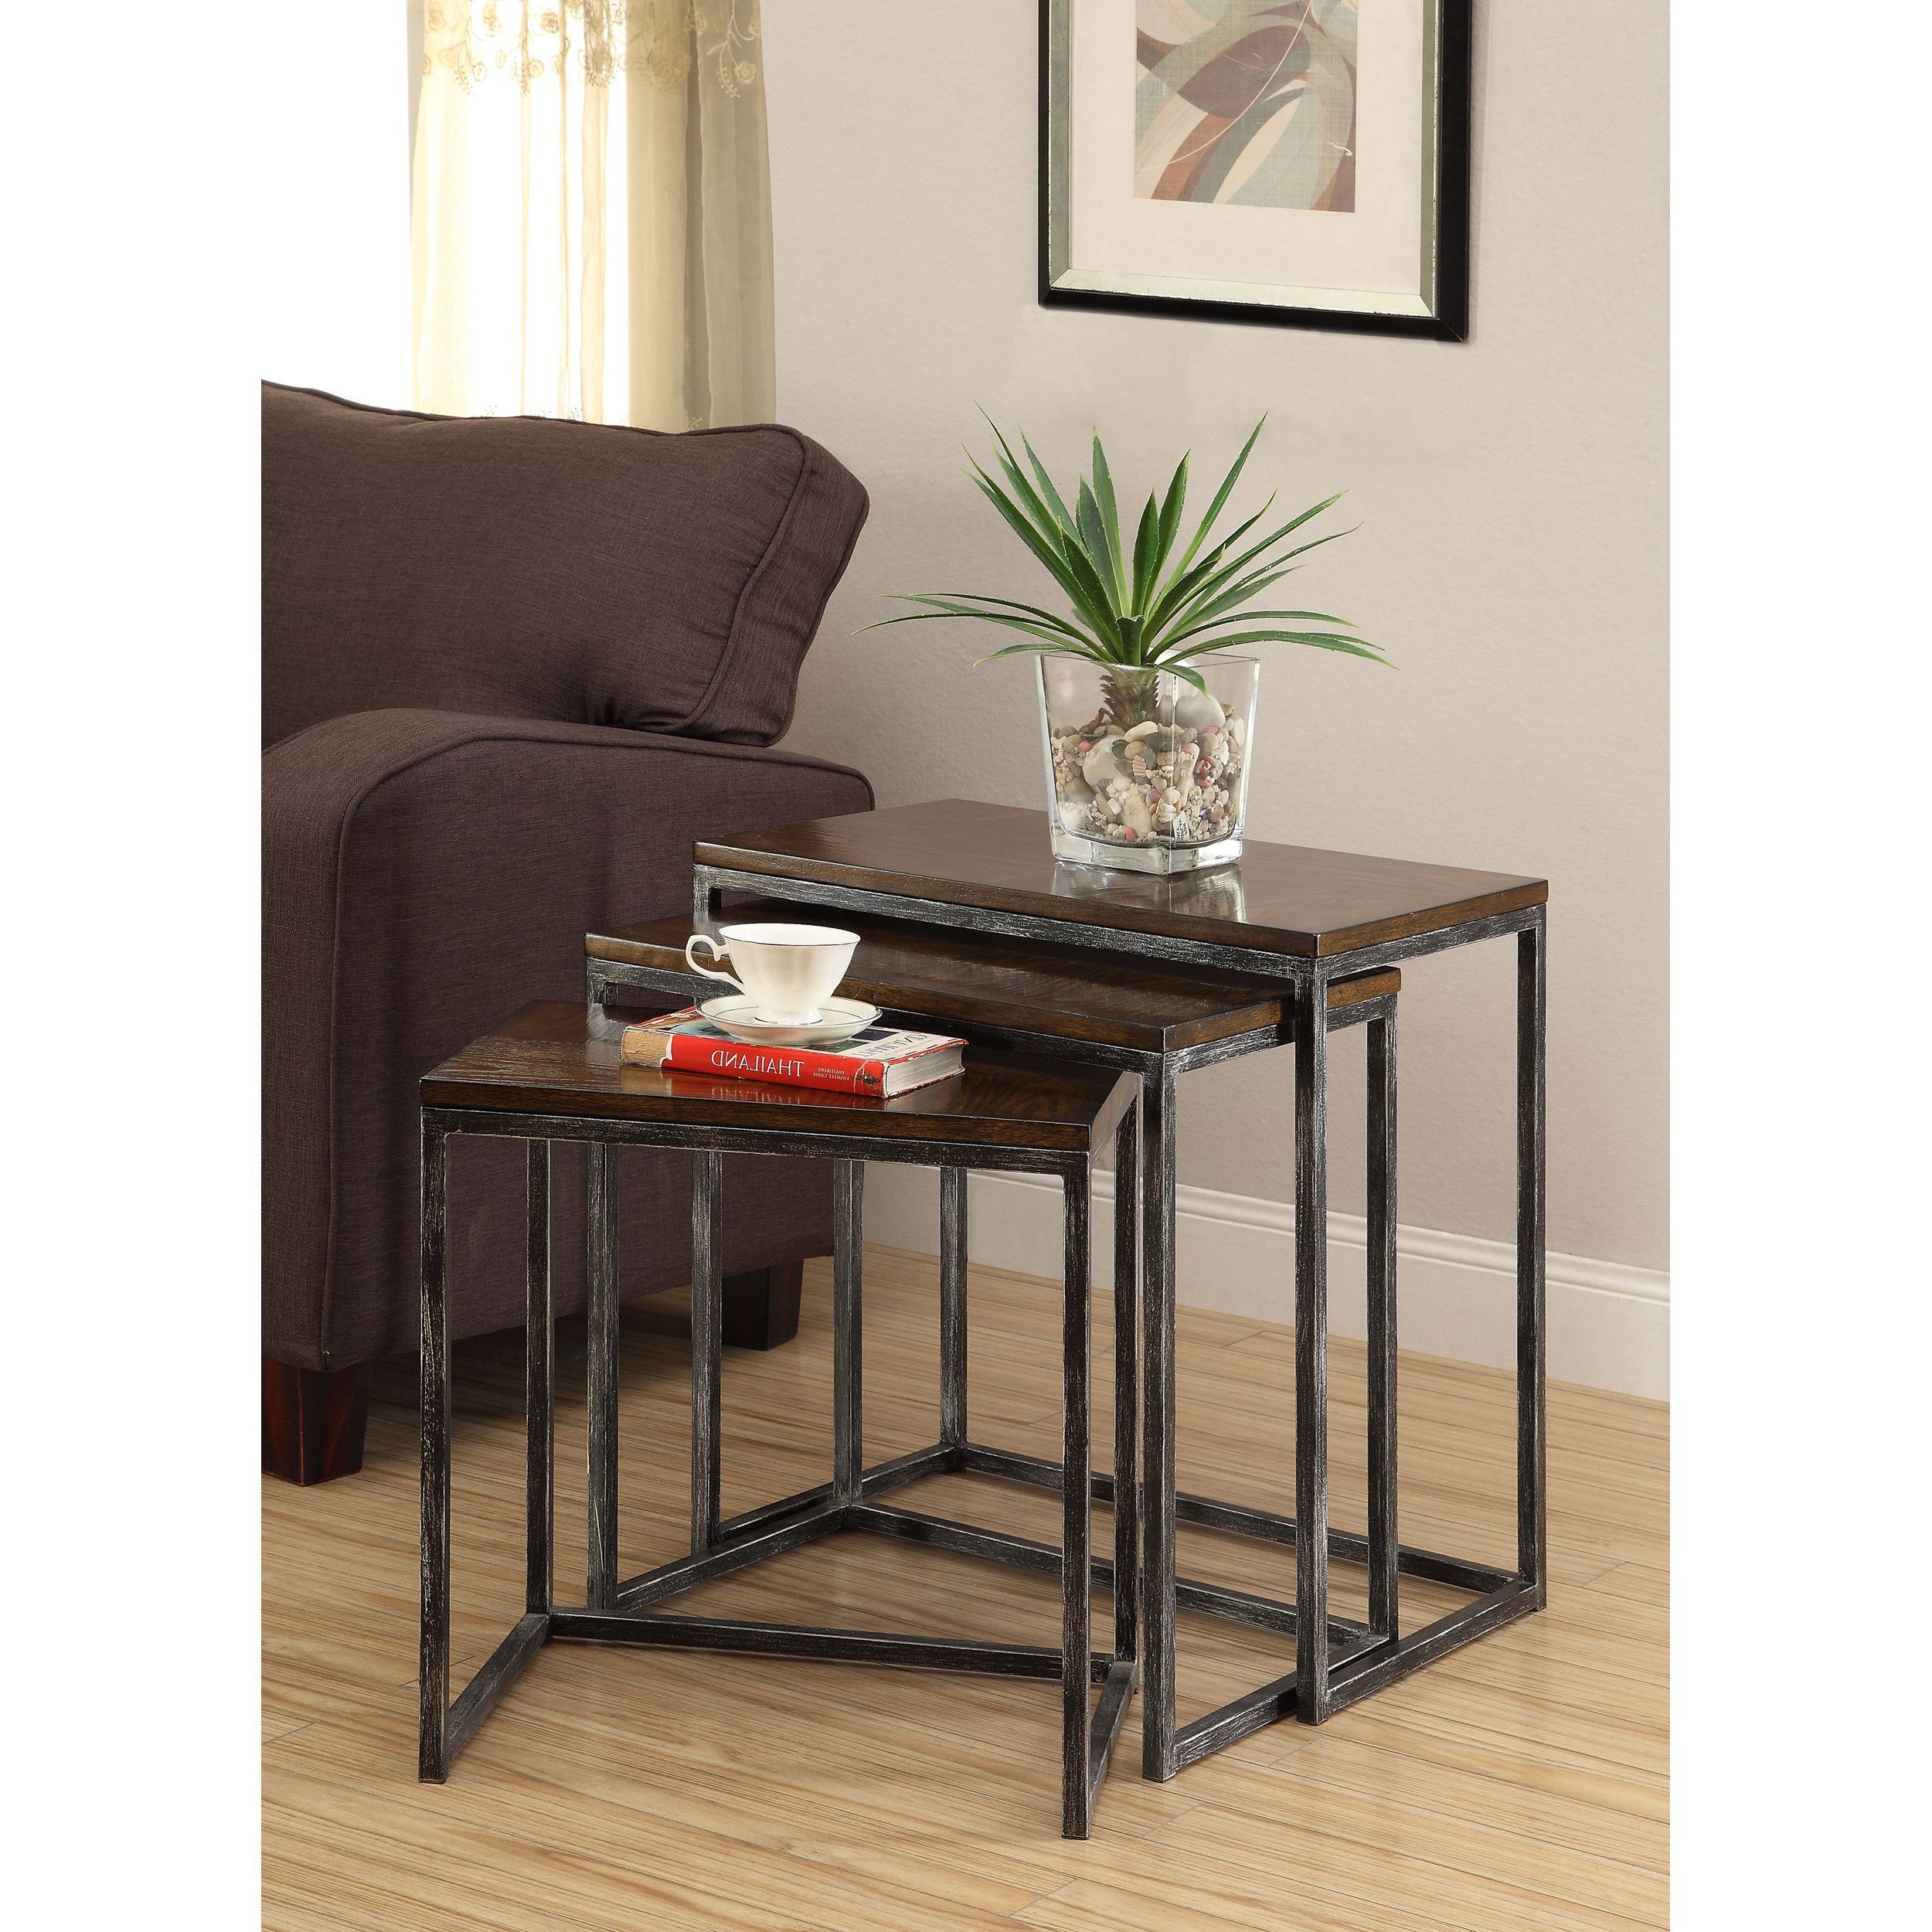 Somette Brown Cherry 3 Tier Nesting Accent Tables (set Of 3 Throughout Well Liked Coffee Tables Of 3 Nesting Tables (View 14 of 15)